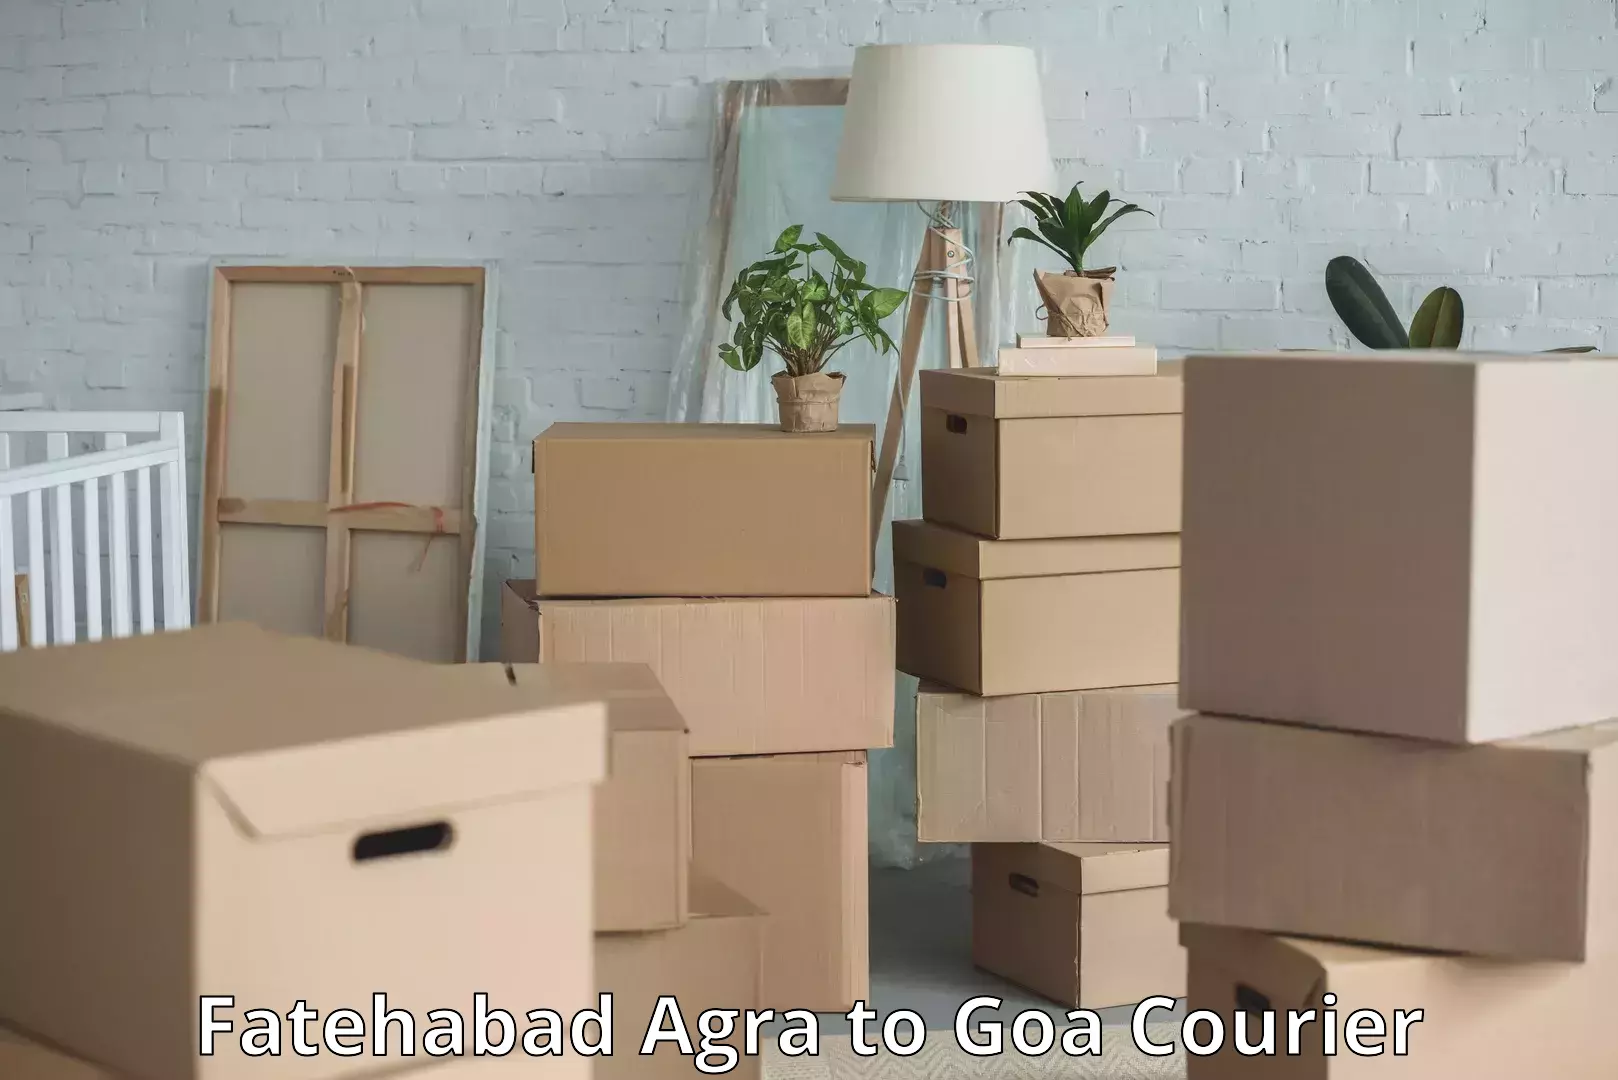 Domestic luggage transport in Fatehabad Agra to Goa